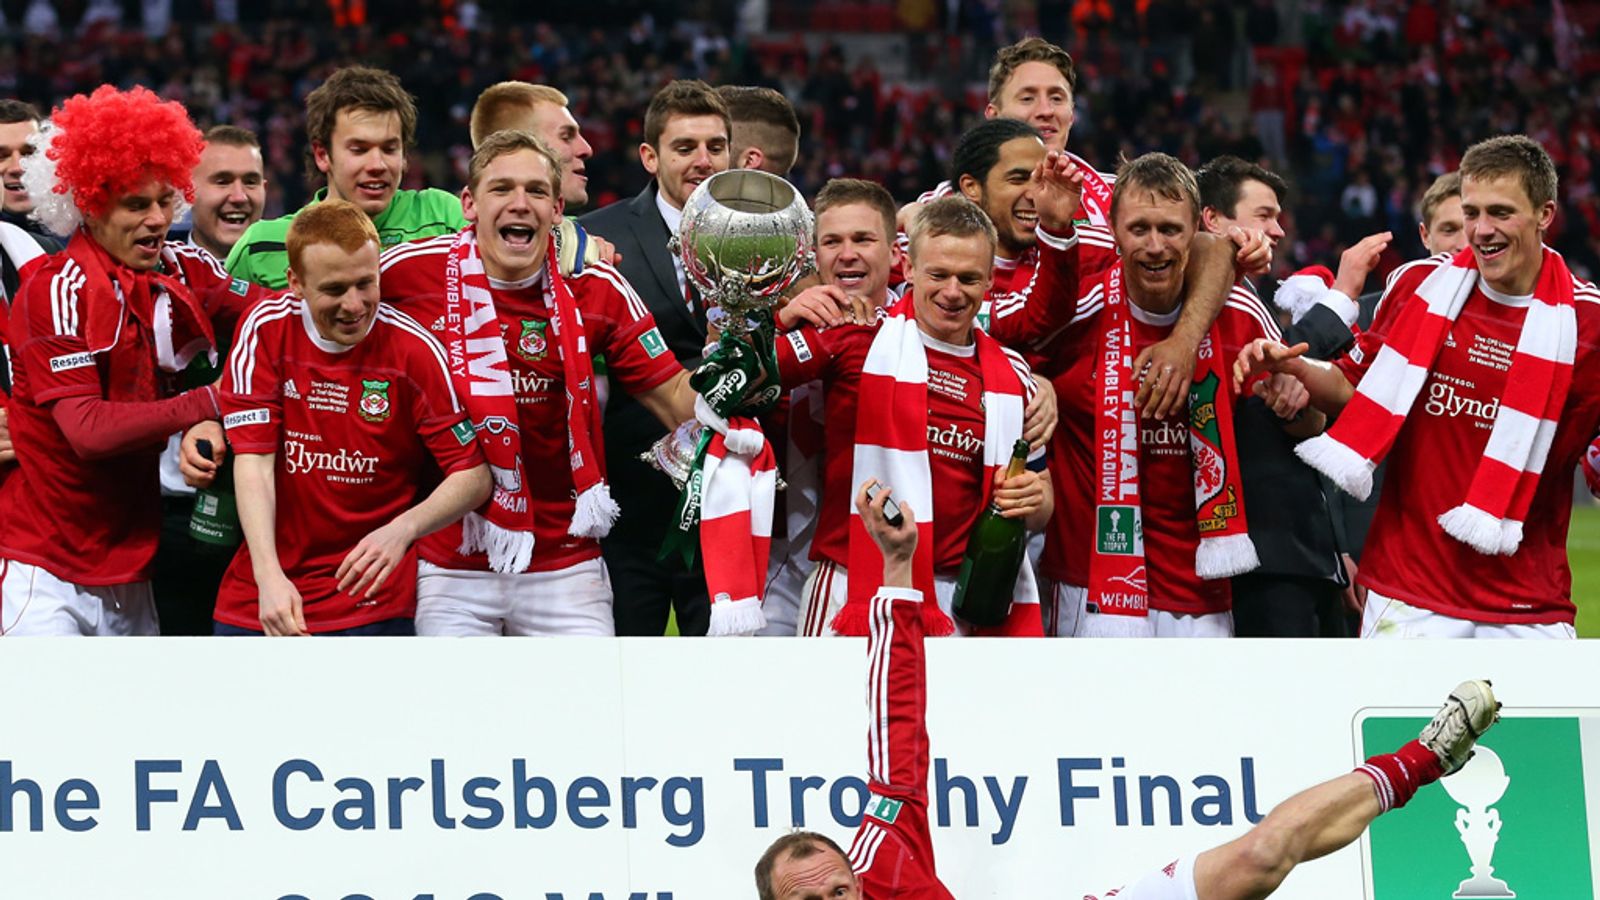 Wrexham lift the FA Trophy after beating Grimsby 41 on penalties